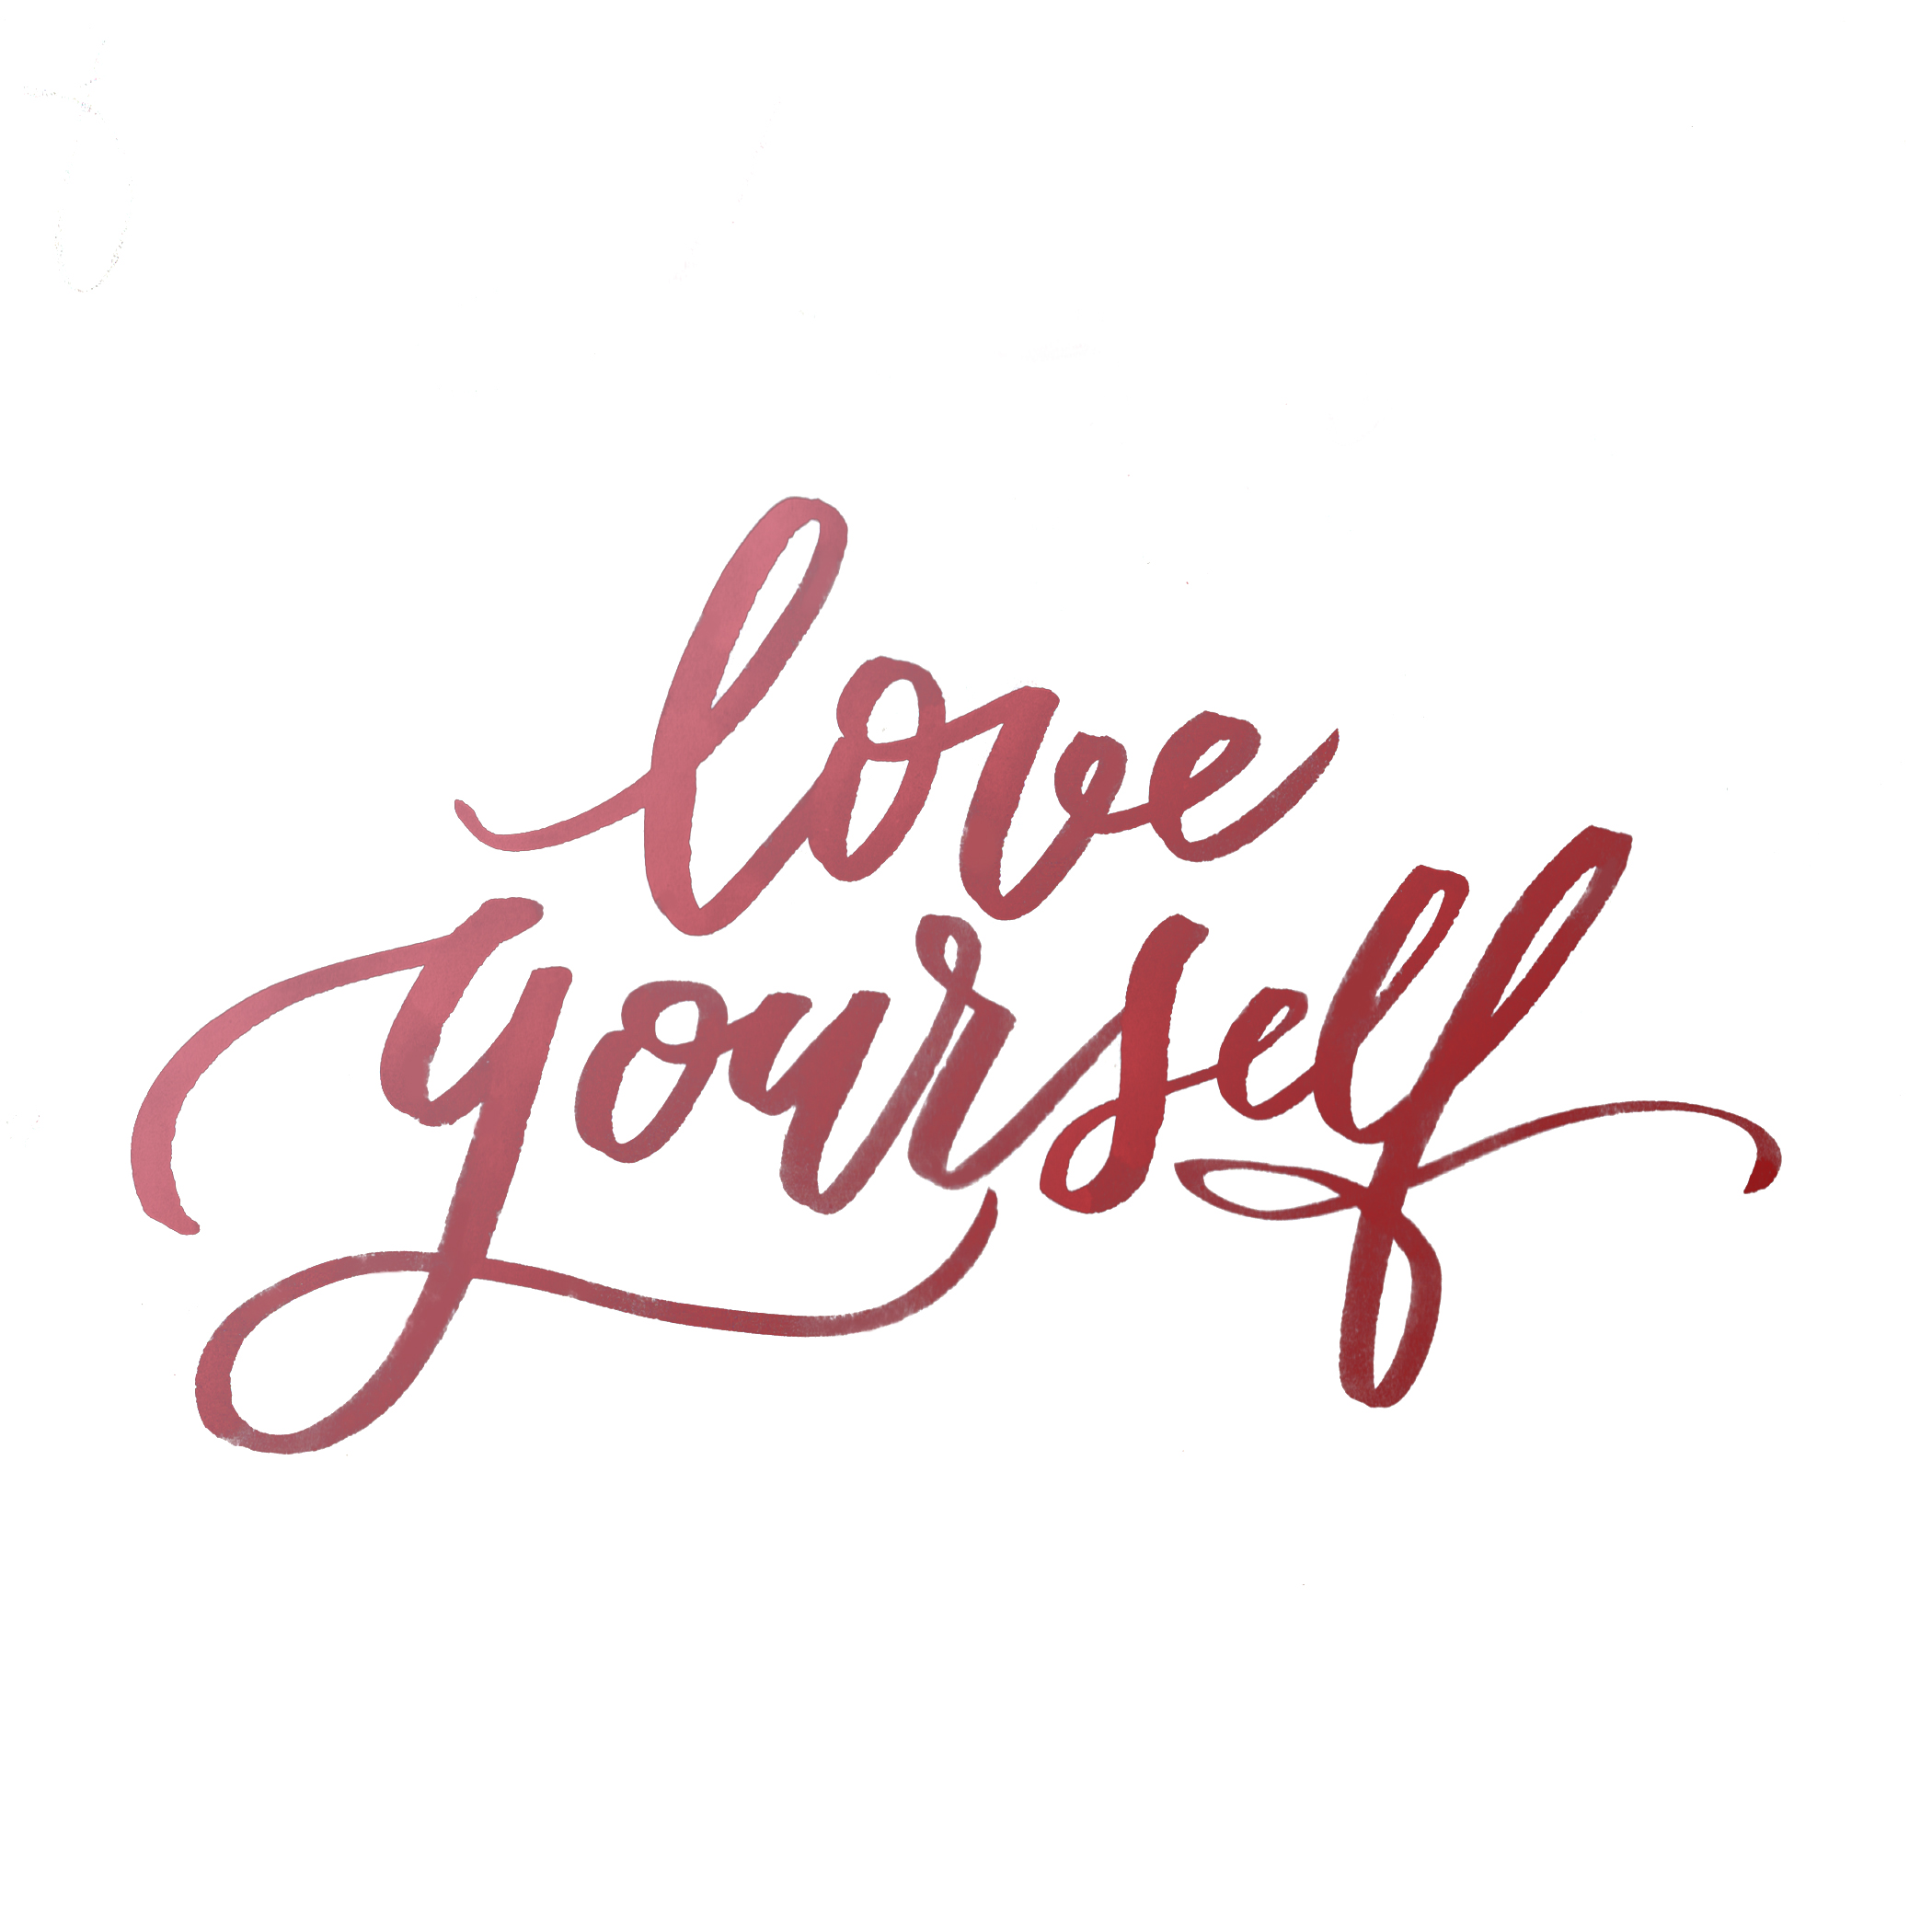 Download Love Yourself: Small Bust Edition - Bra Doctor's Blog ...